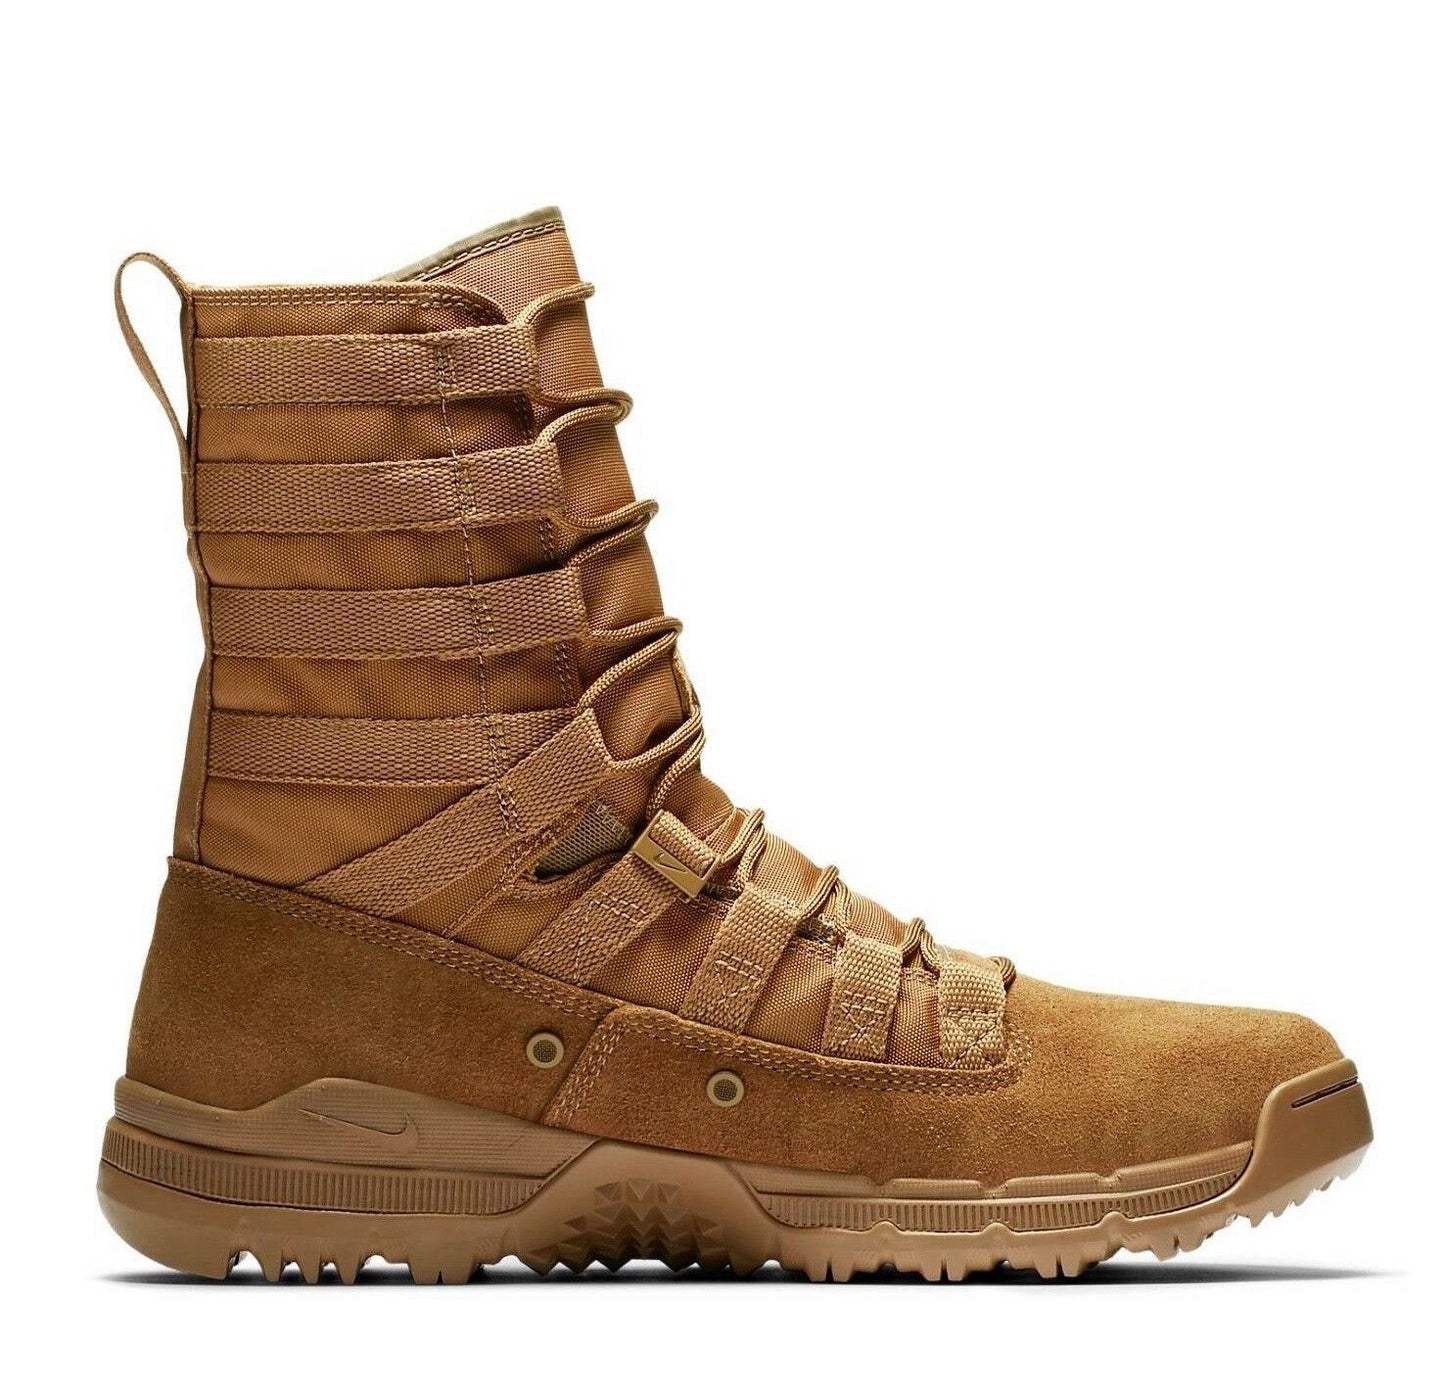 NIKE SFB GEN 2 LT 8" Coyote Leather Boots